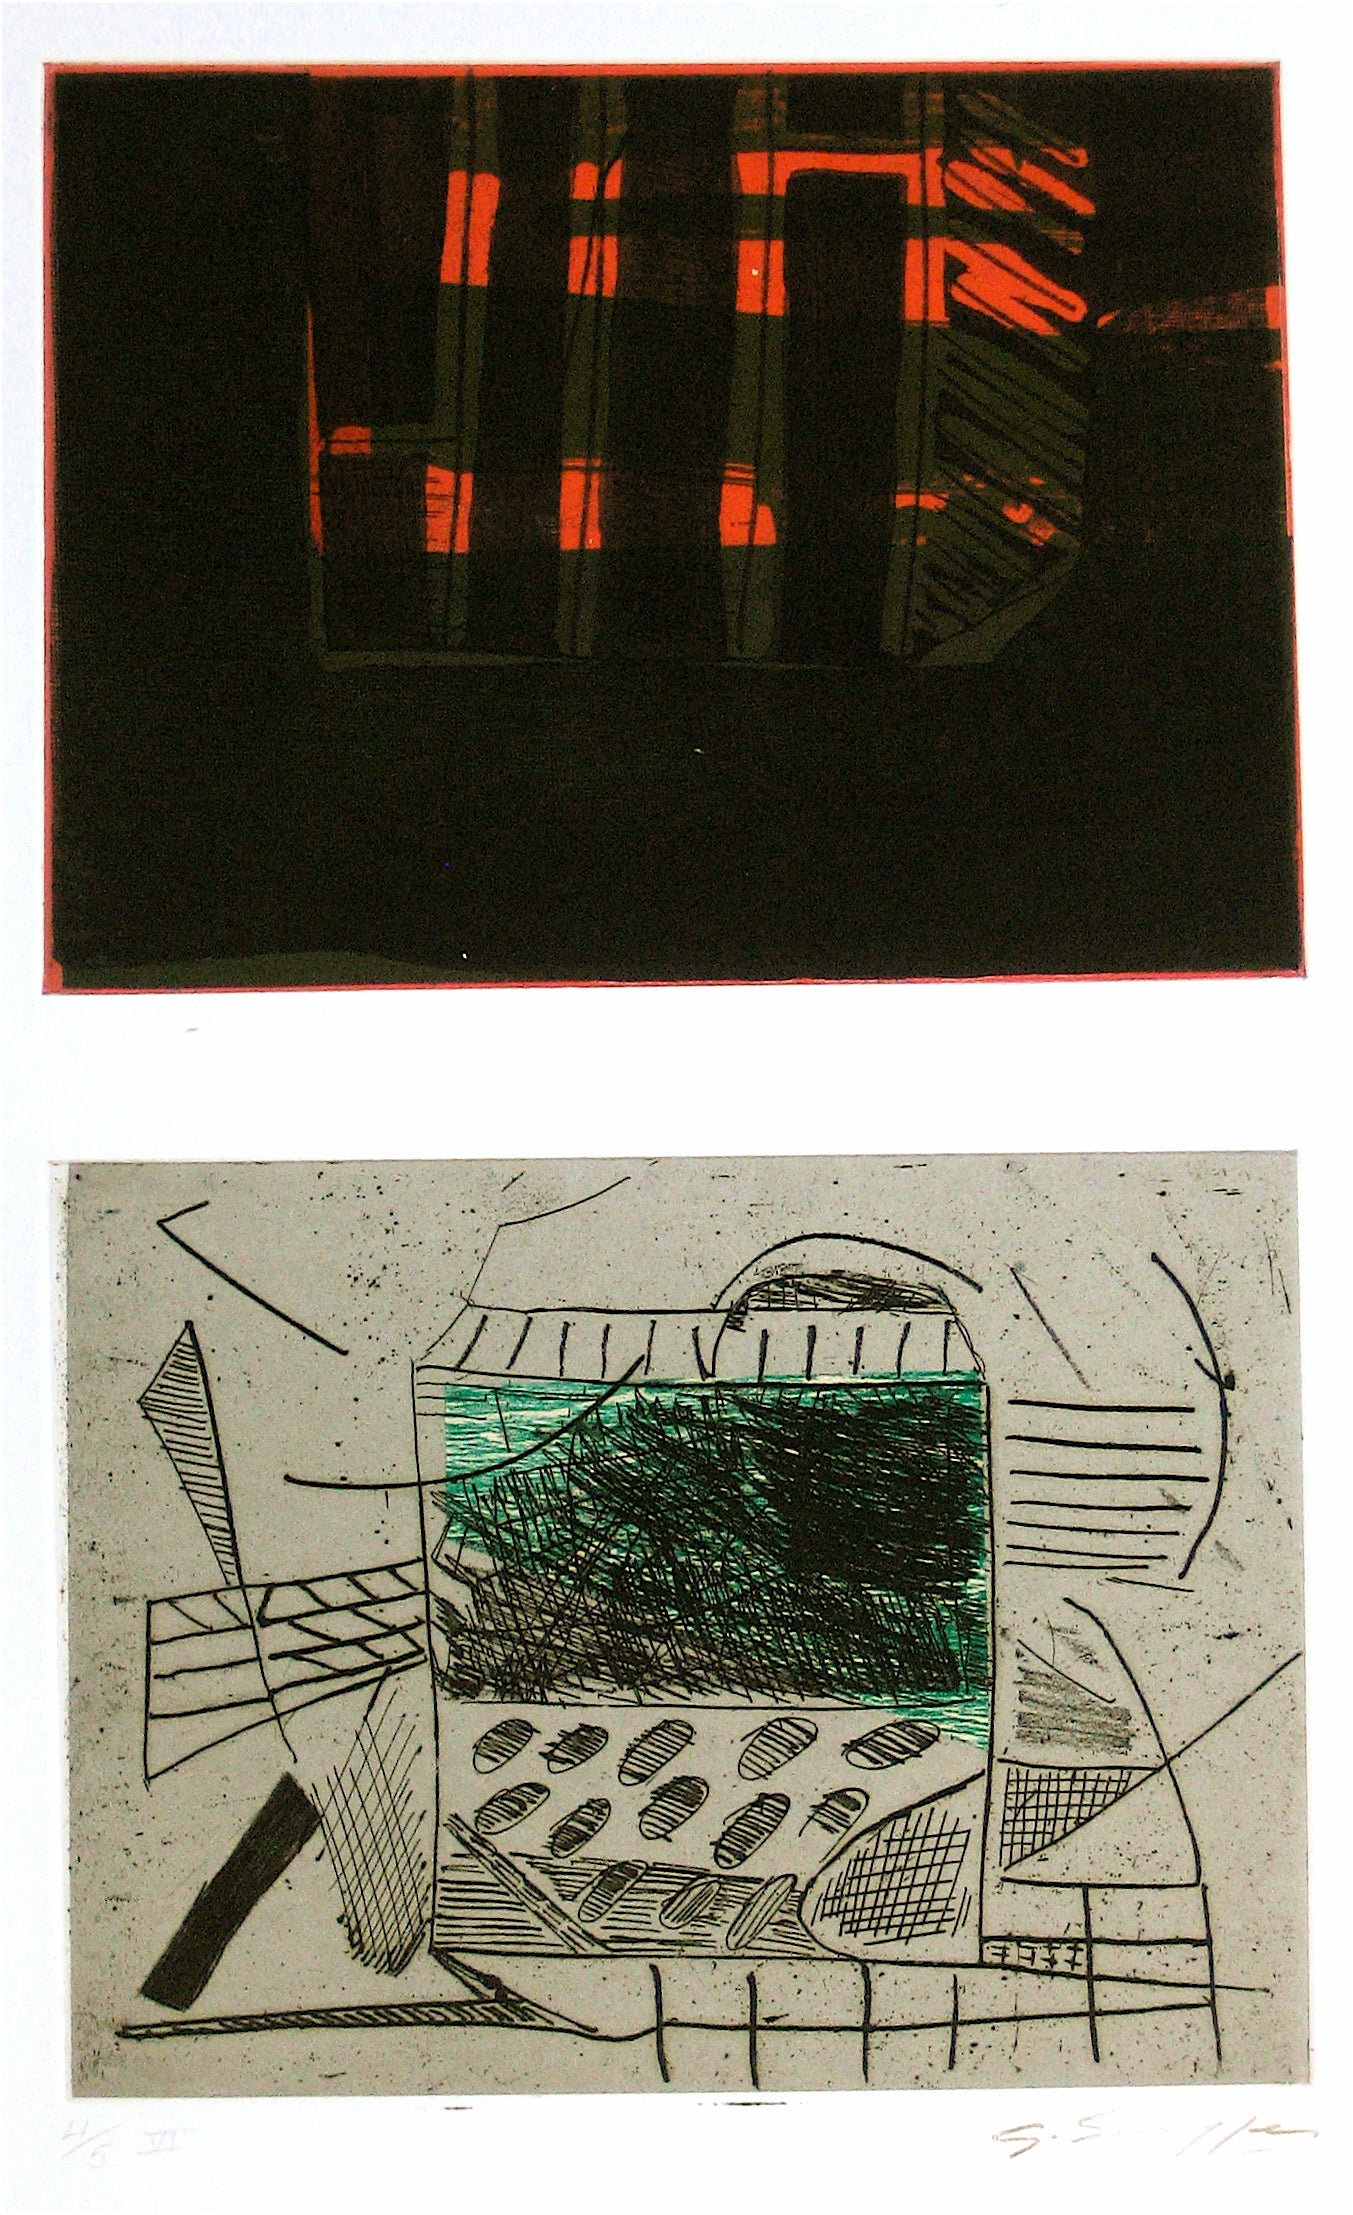 Abstracted Duel Image <br>1989 Litho & Chine Colle <br><br>#11780